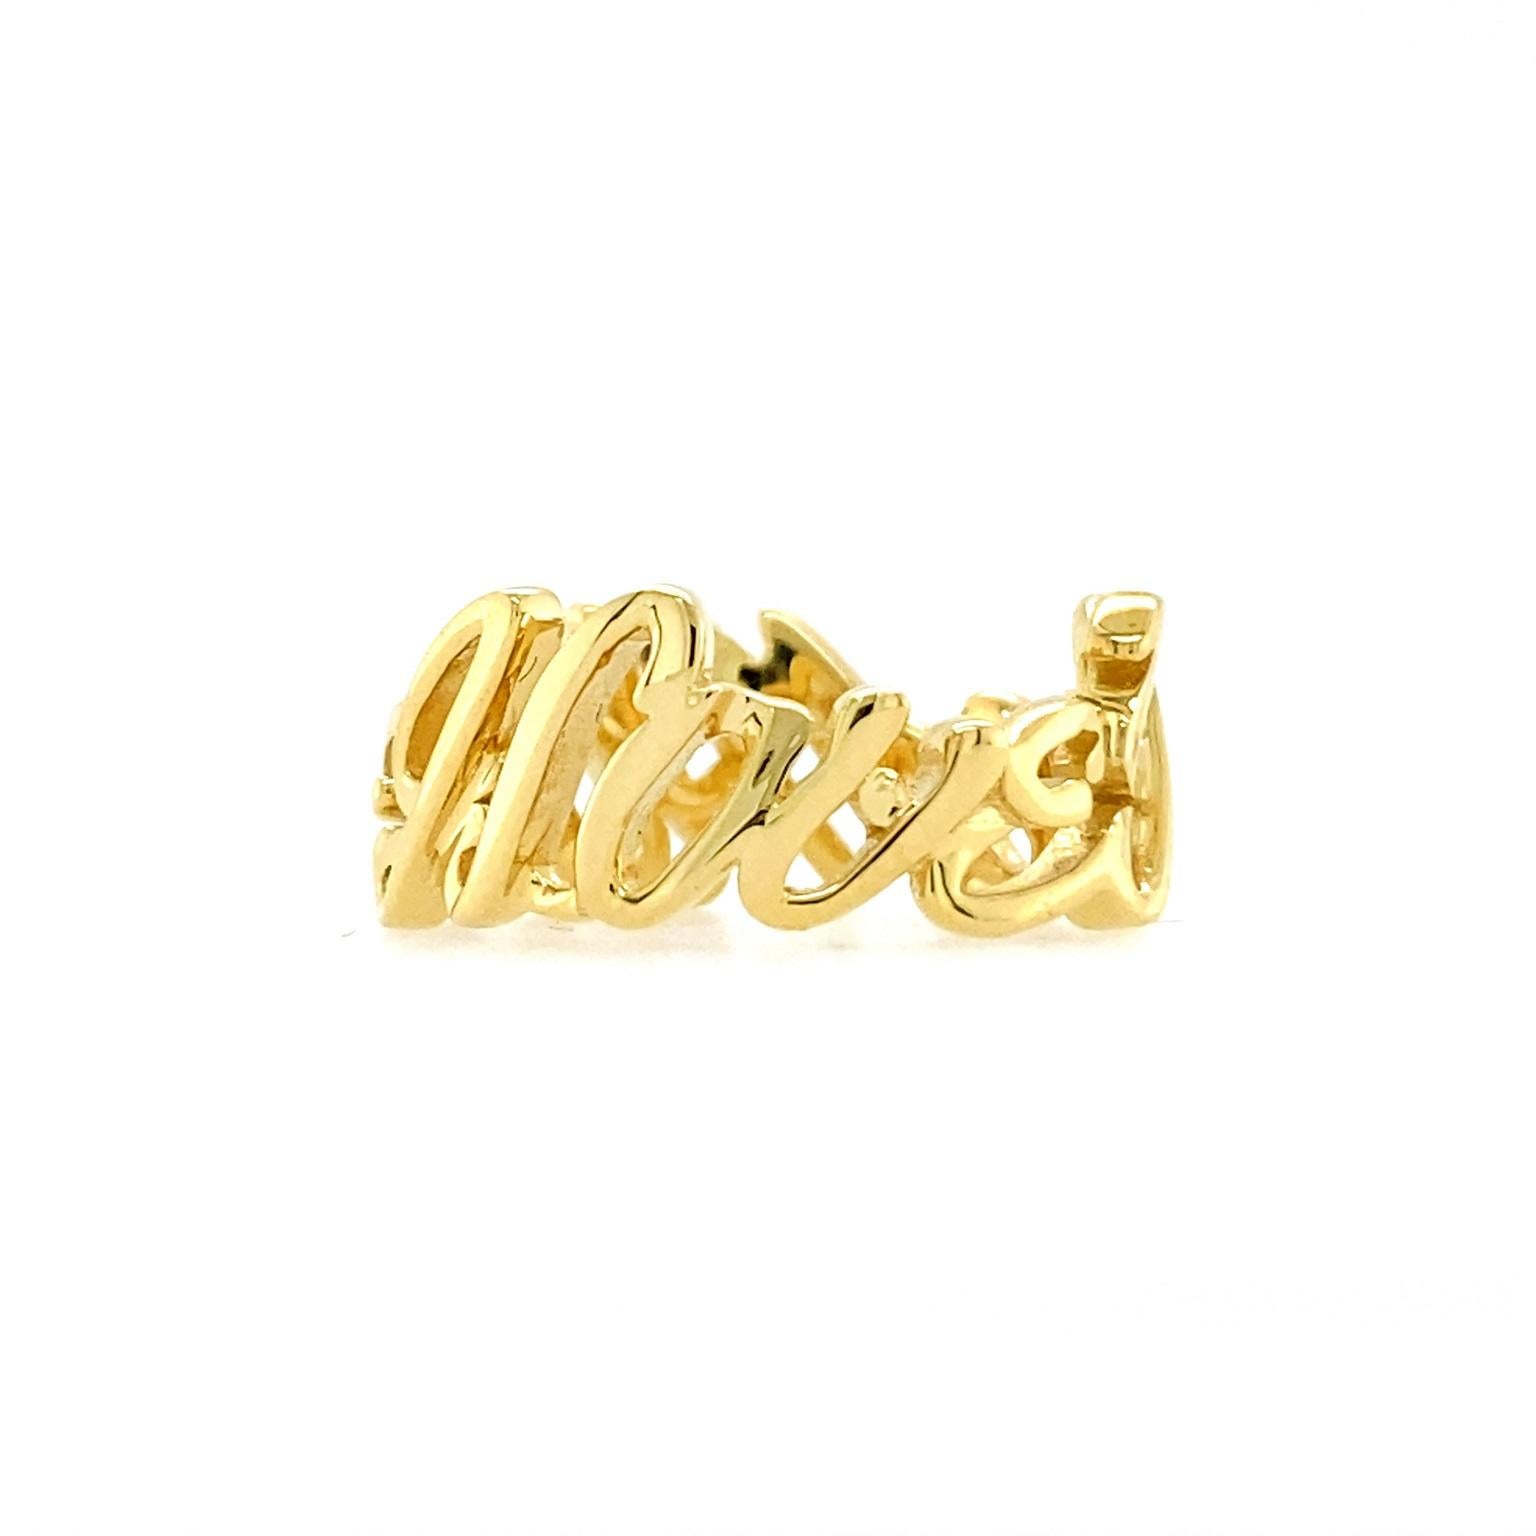 Polished 18k yellow gold in gliding cursive embodies romance of the message I Love You More. The words form its own band, which measures 20.6 mm (width) by 8 mm (height) by 20.6 mm (depth).